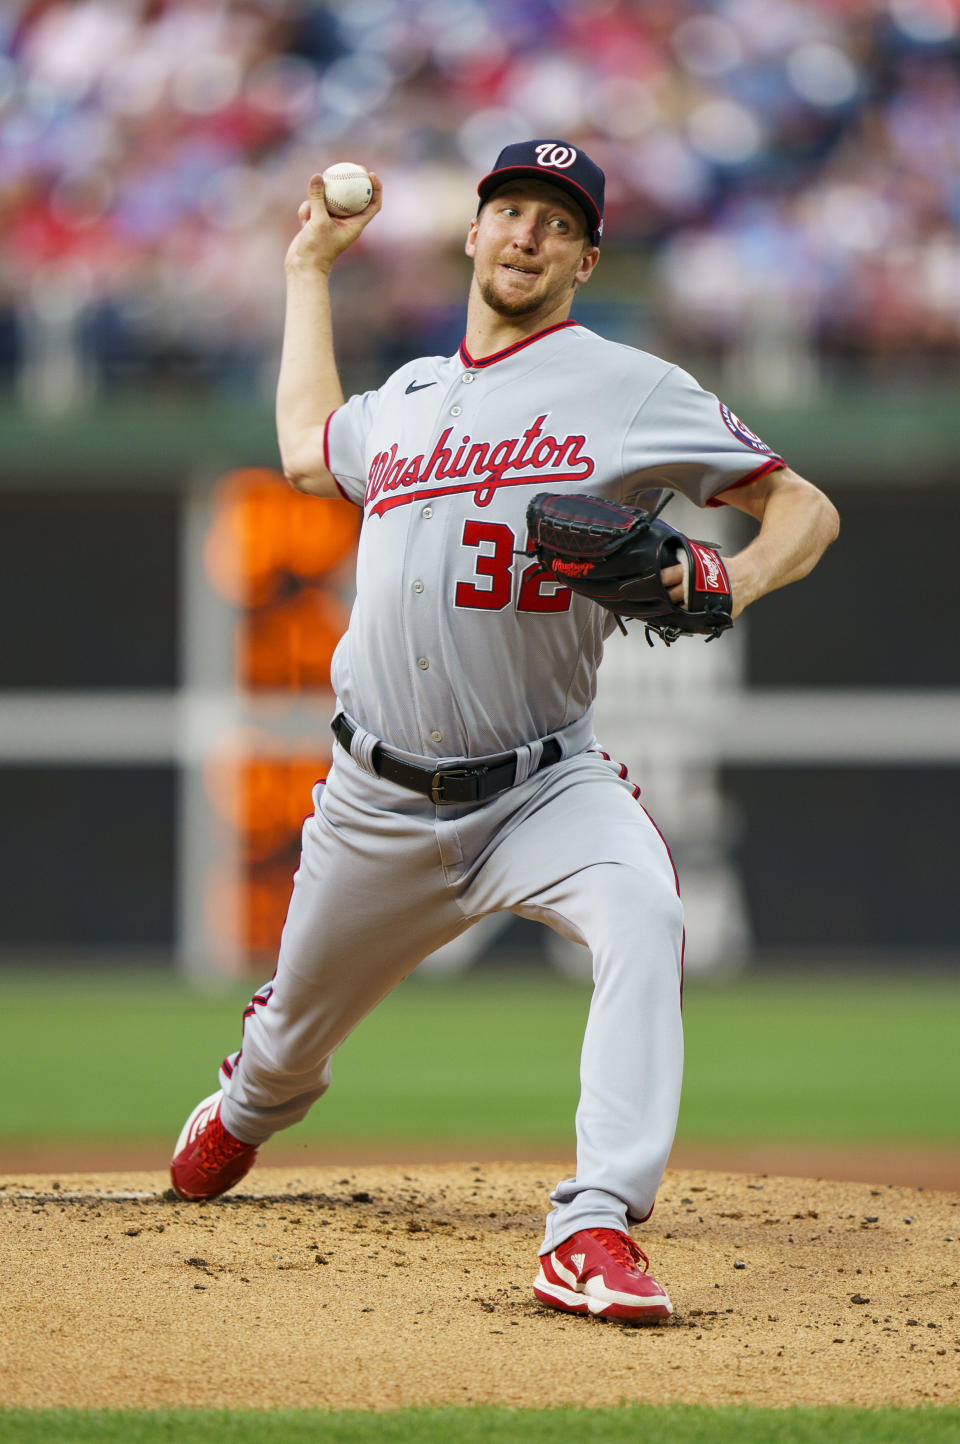 Washington Nationals starting pitcher Erick Fedde throws during the first inning of the team's baseball game against the Philadelphia Phillies, Saturday, Sept. 10, 2022, in Philadelphia. (AP Photo/Chris Szagola)